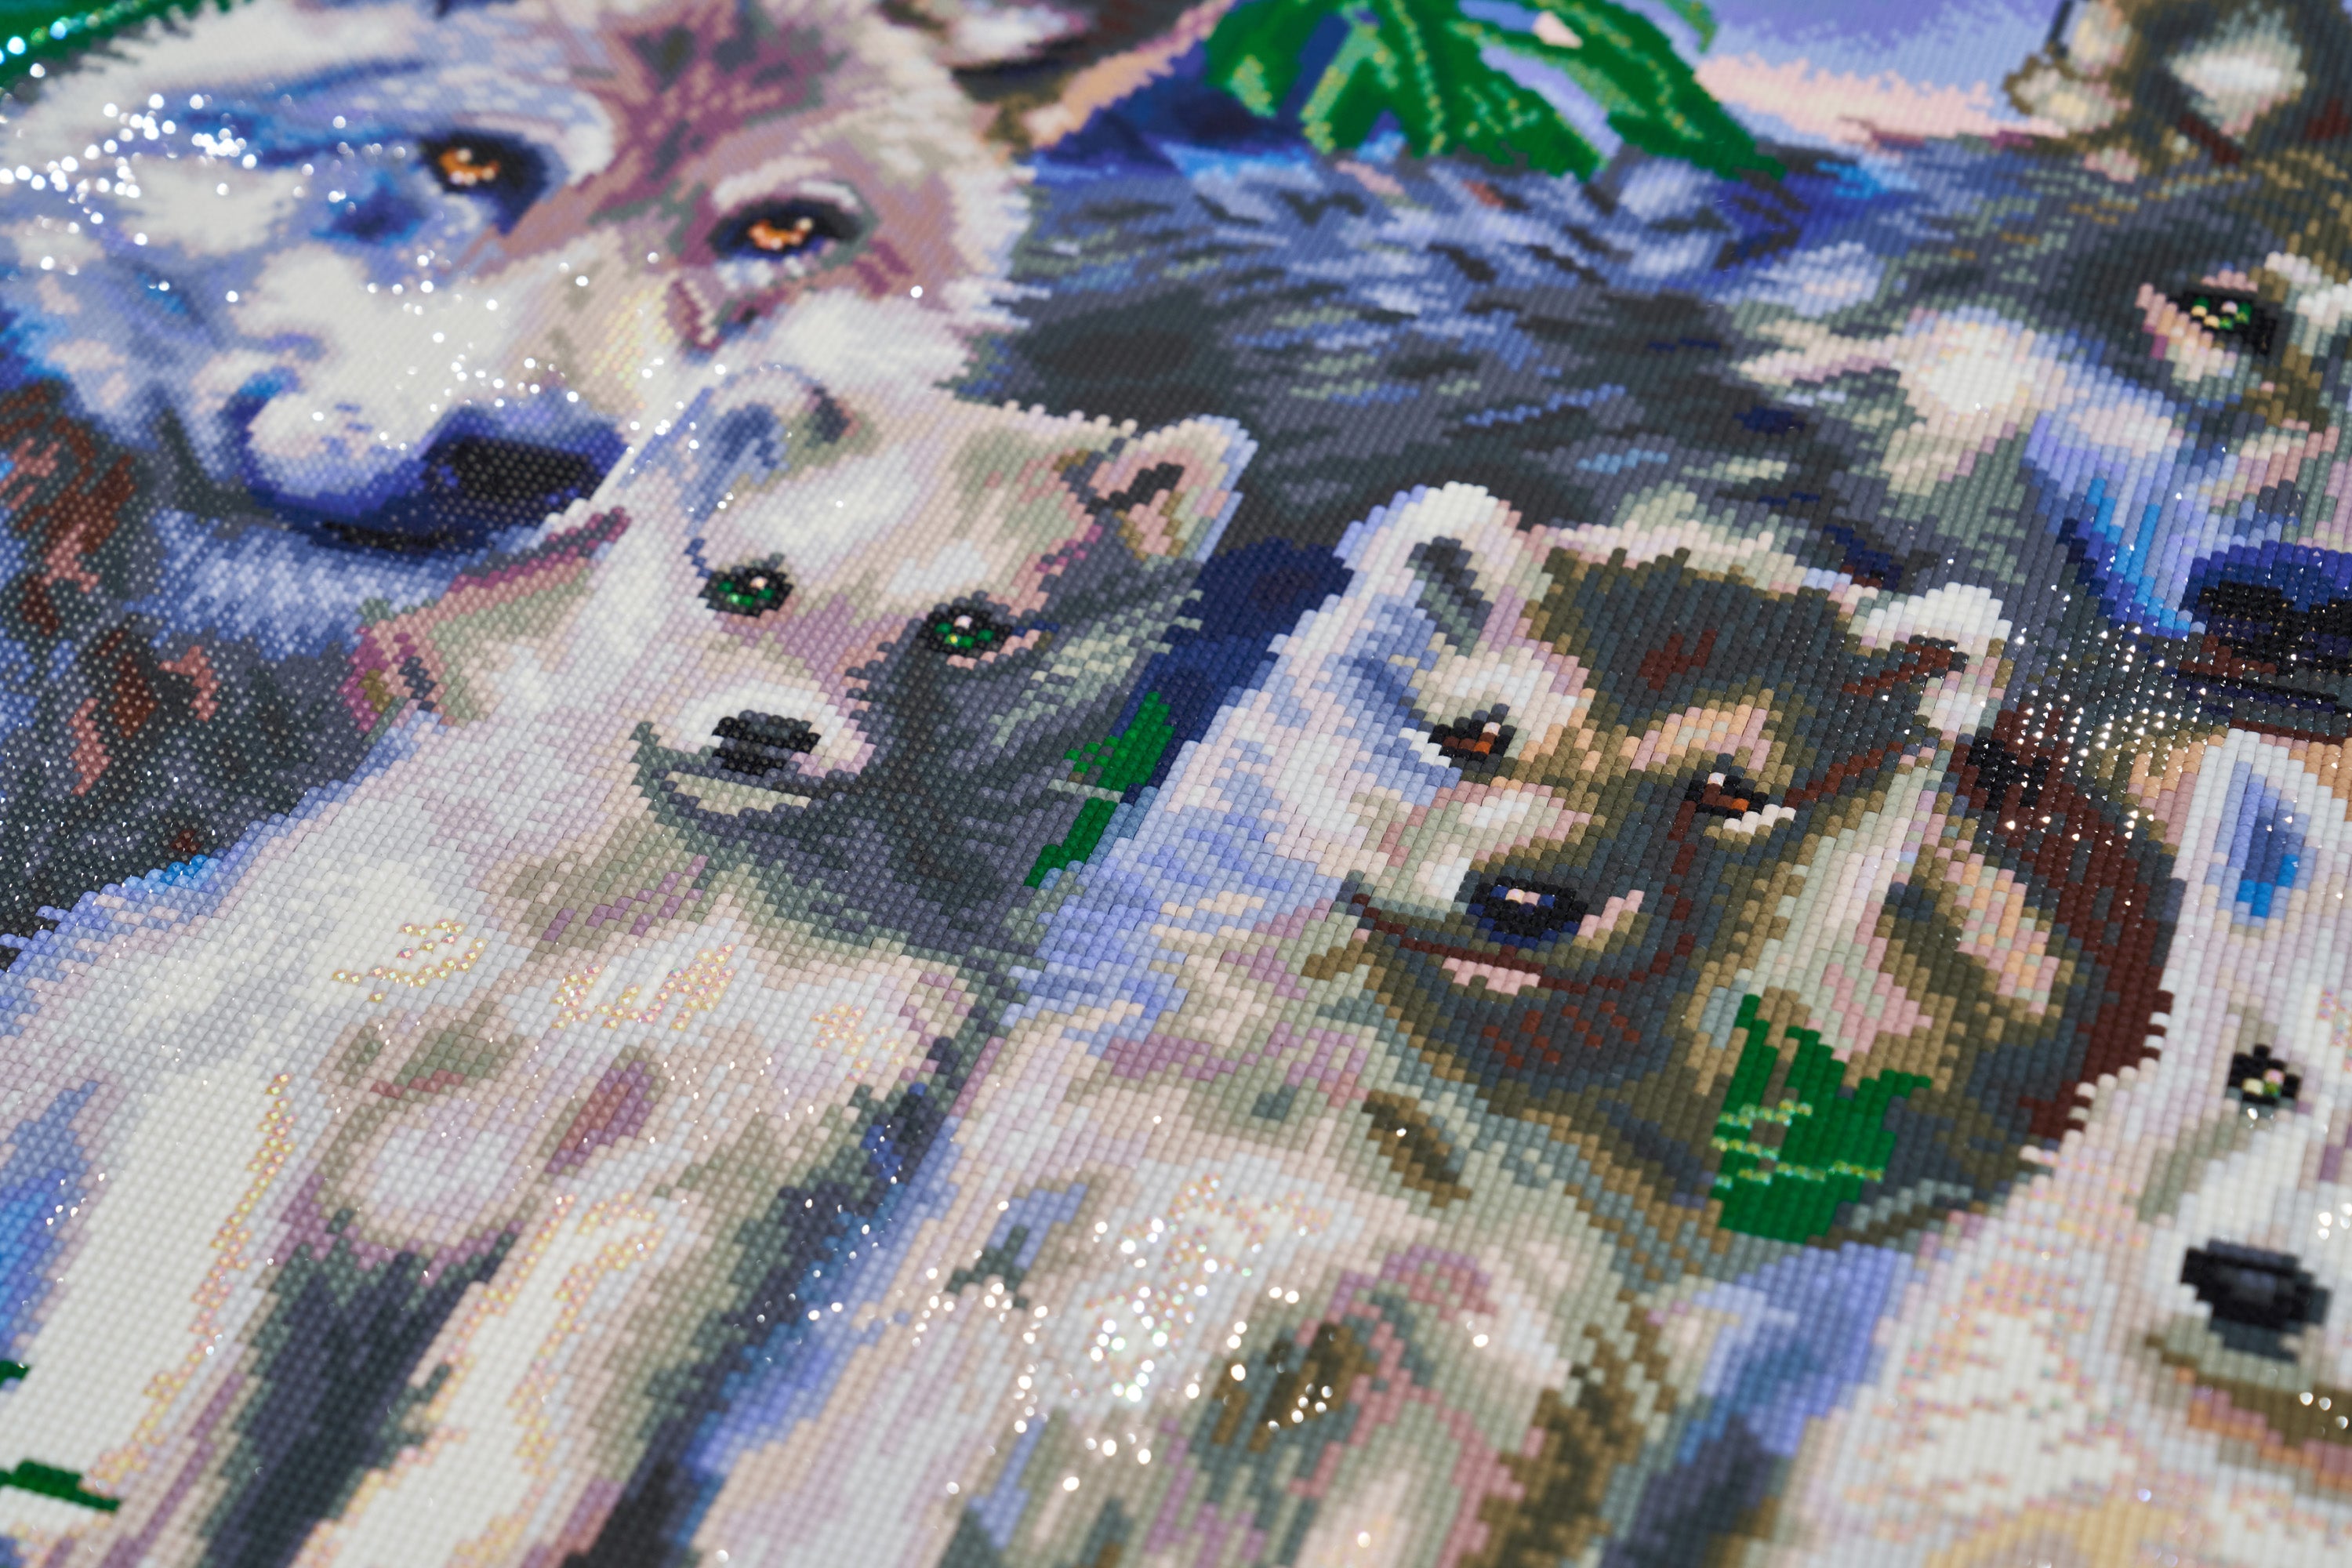 Together Wolves – Diamond Art Club